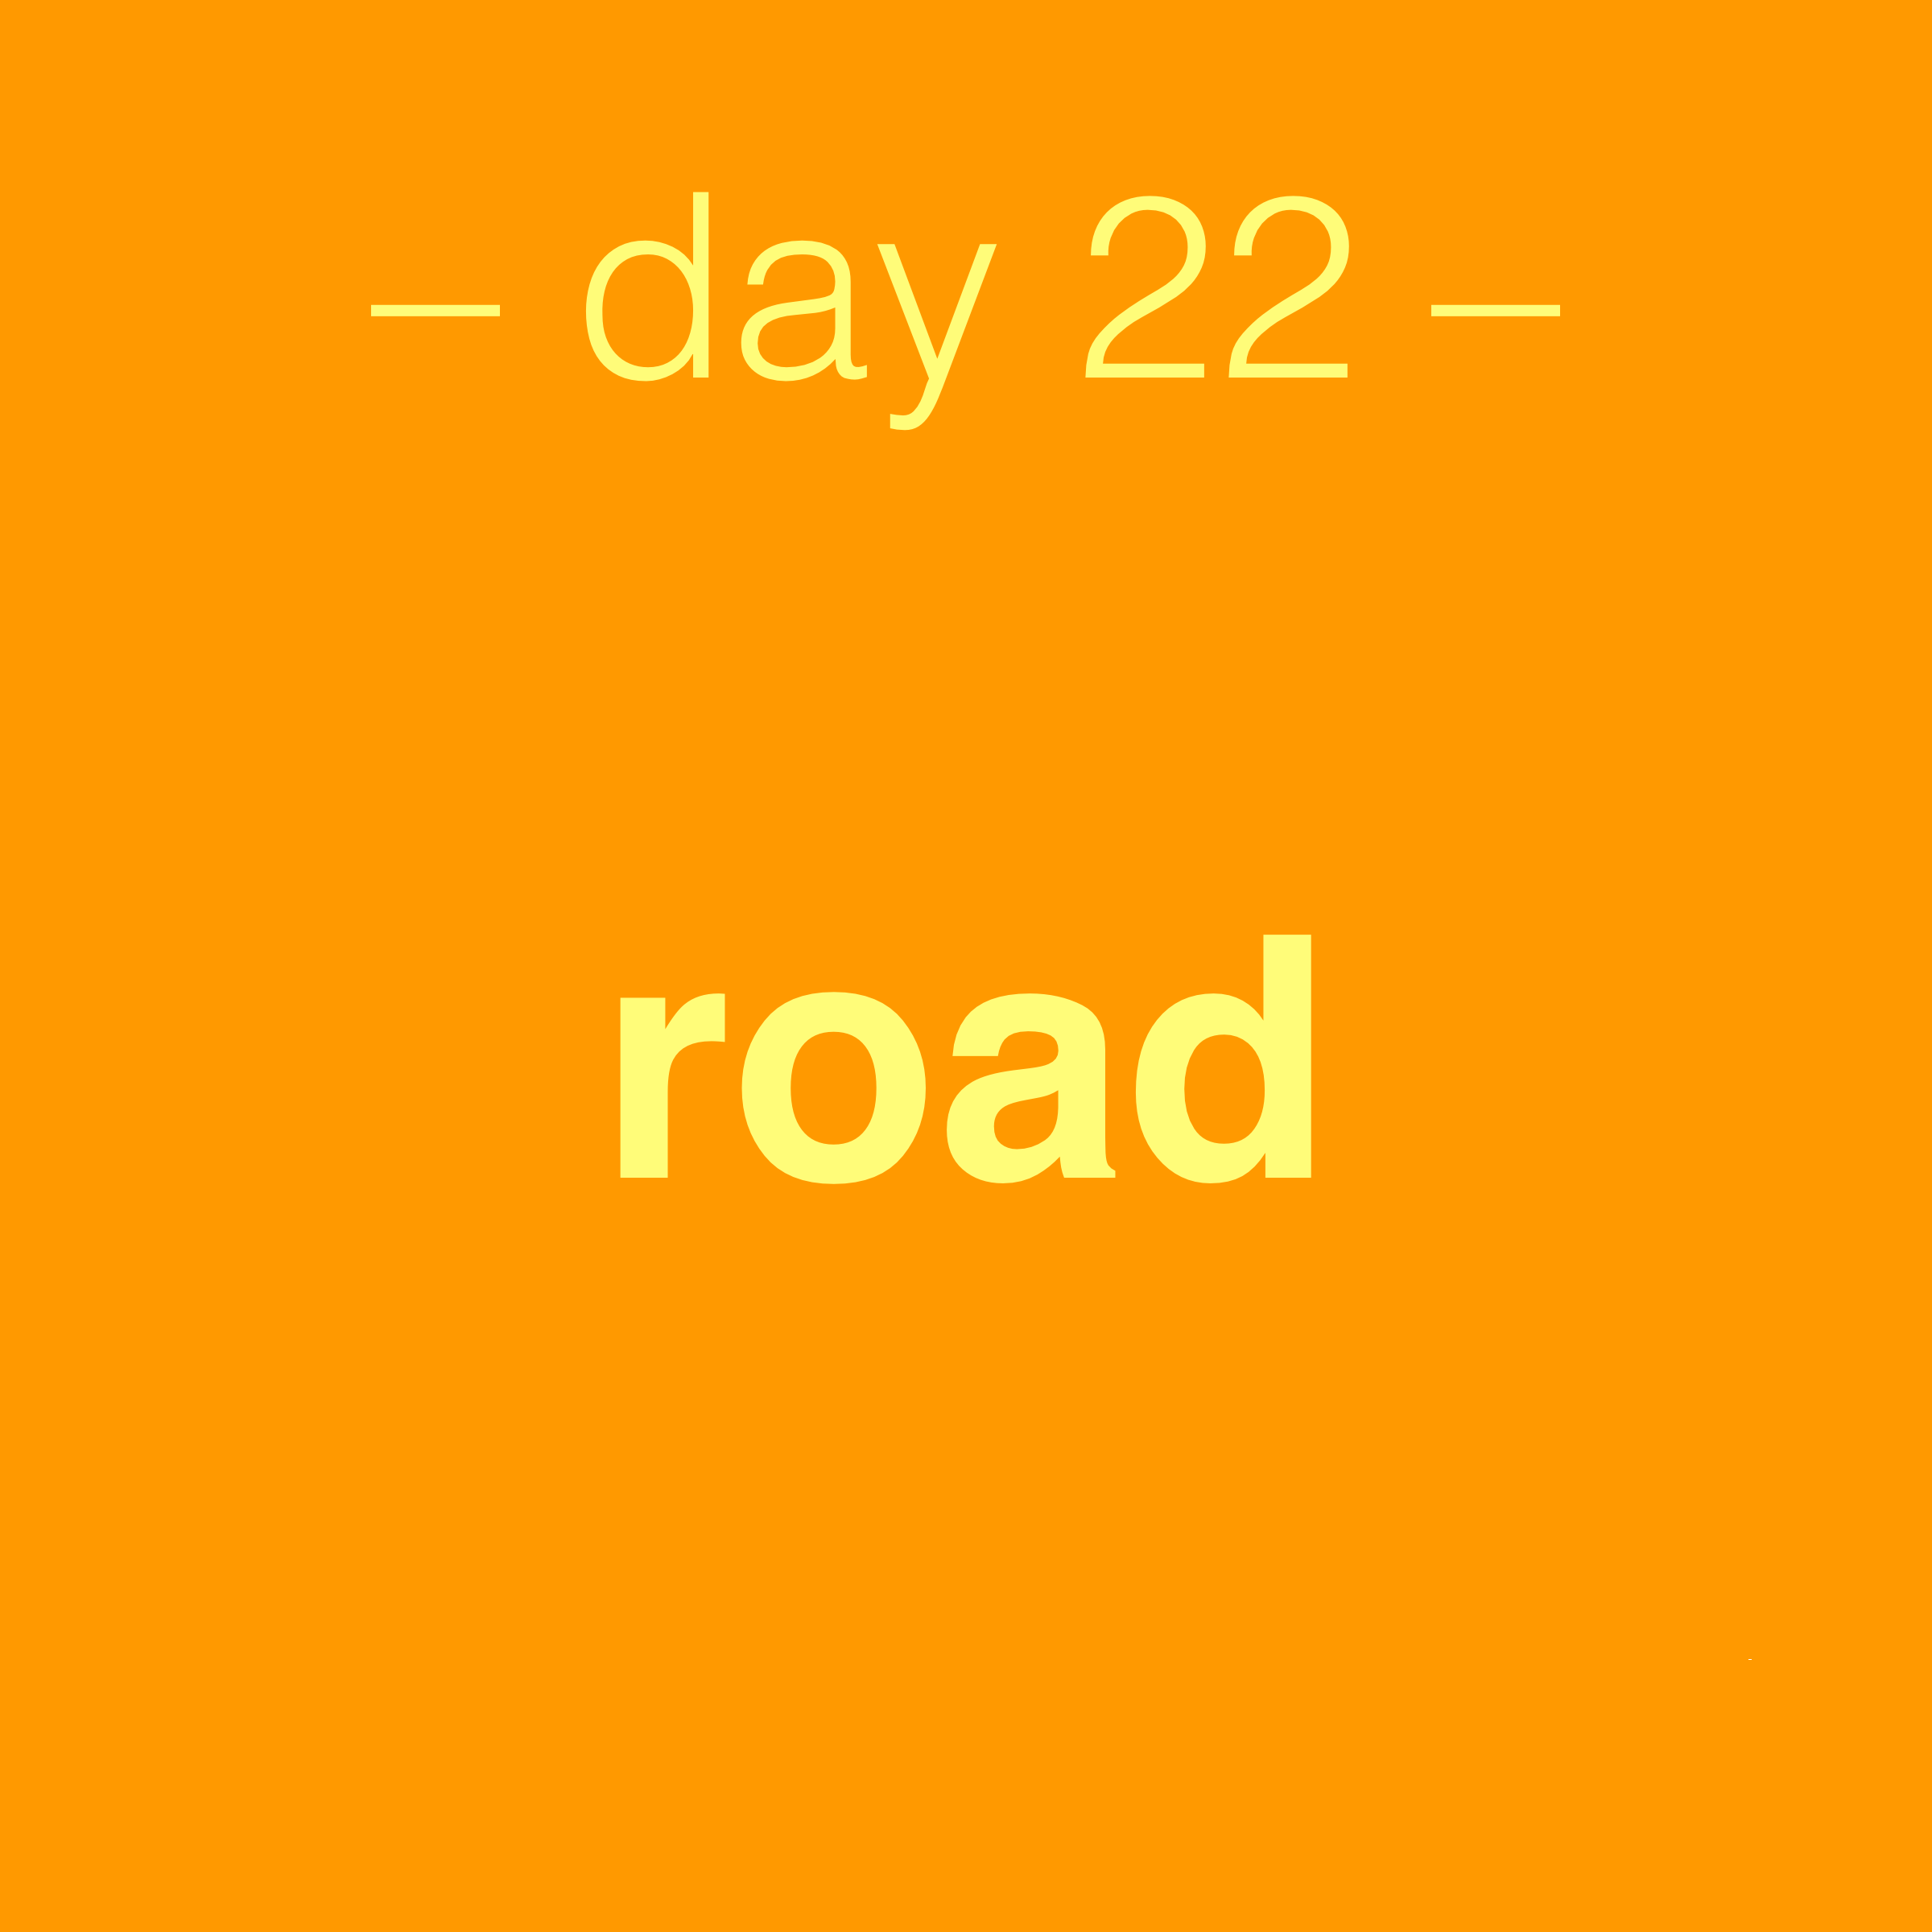 day22-road